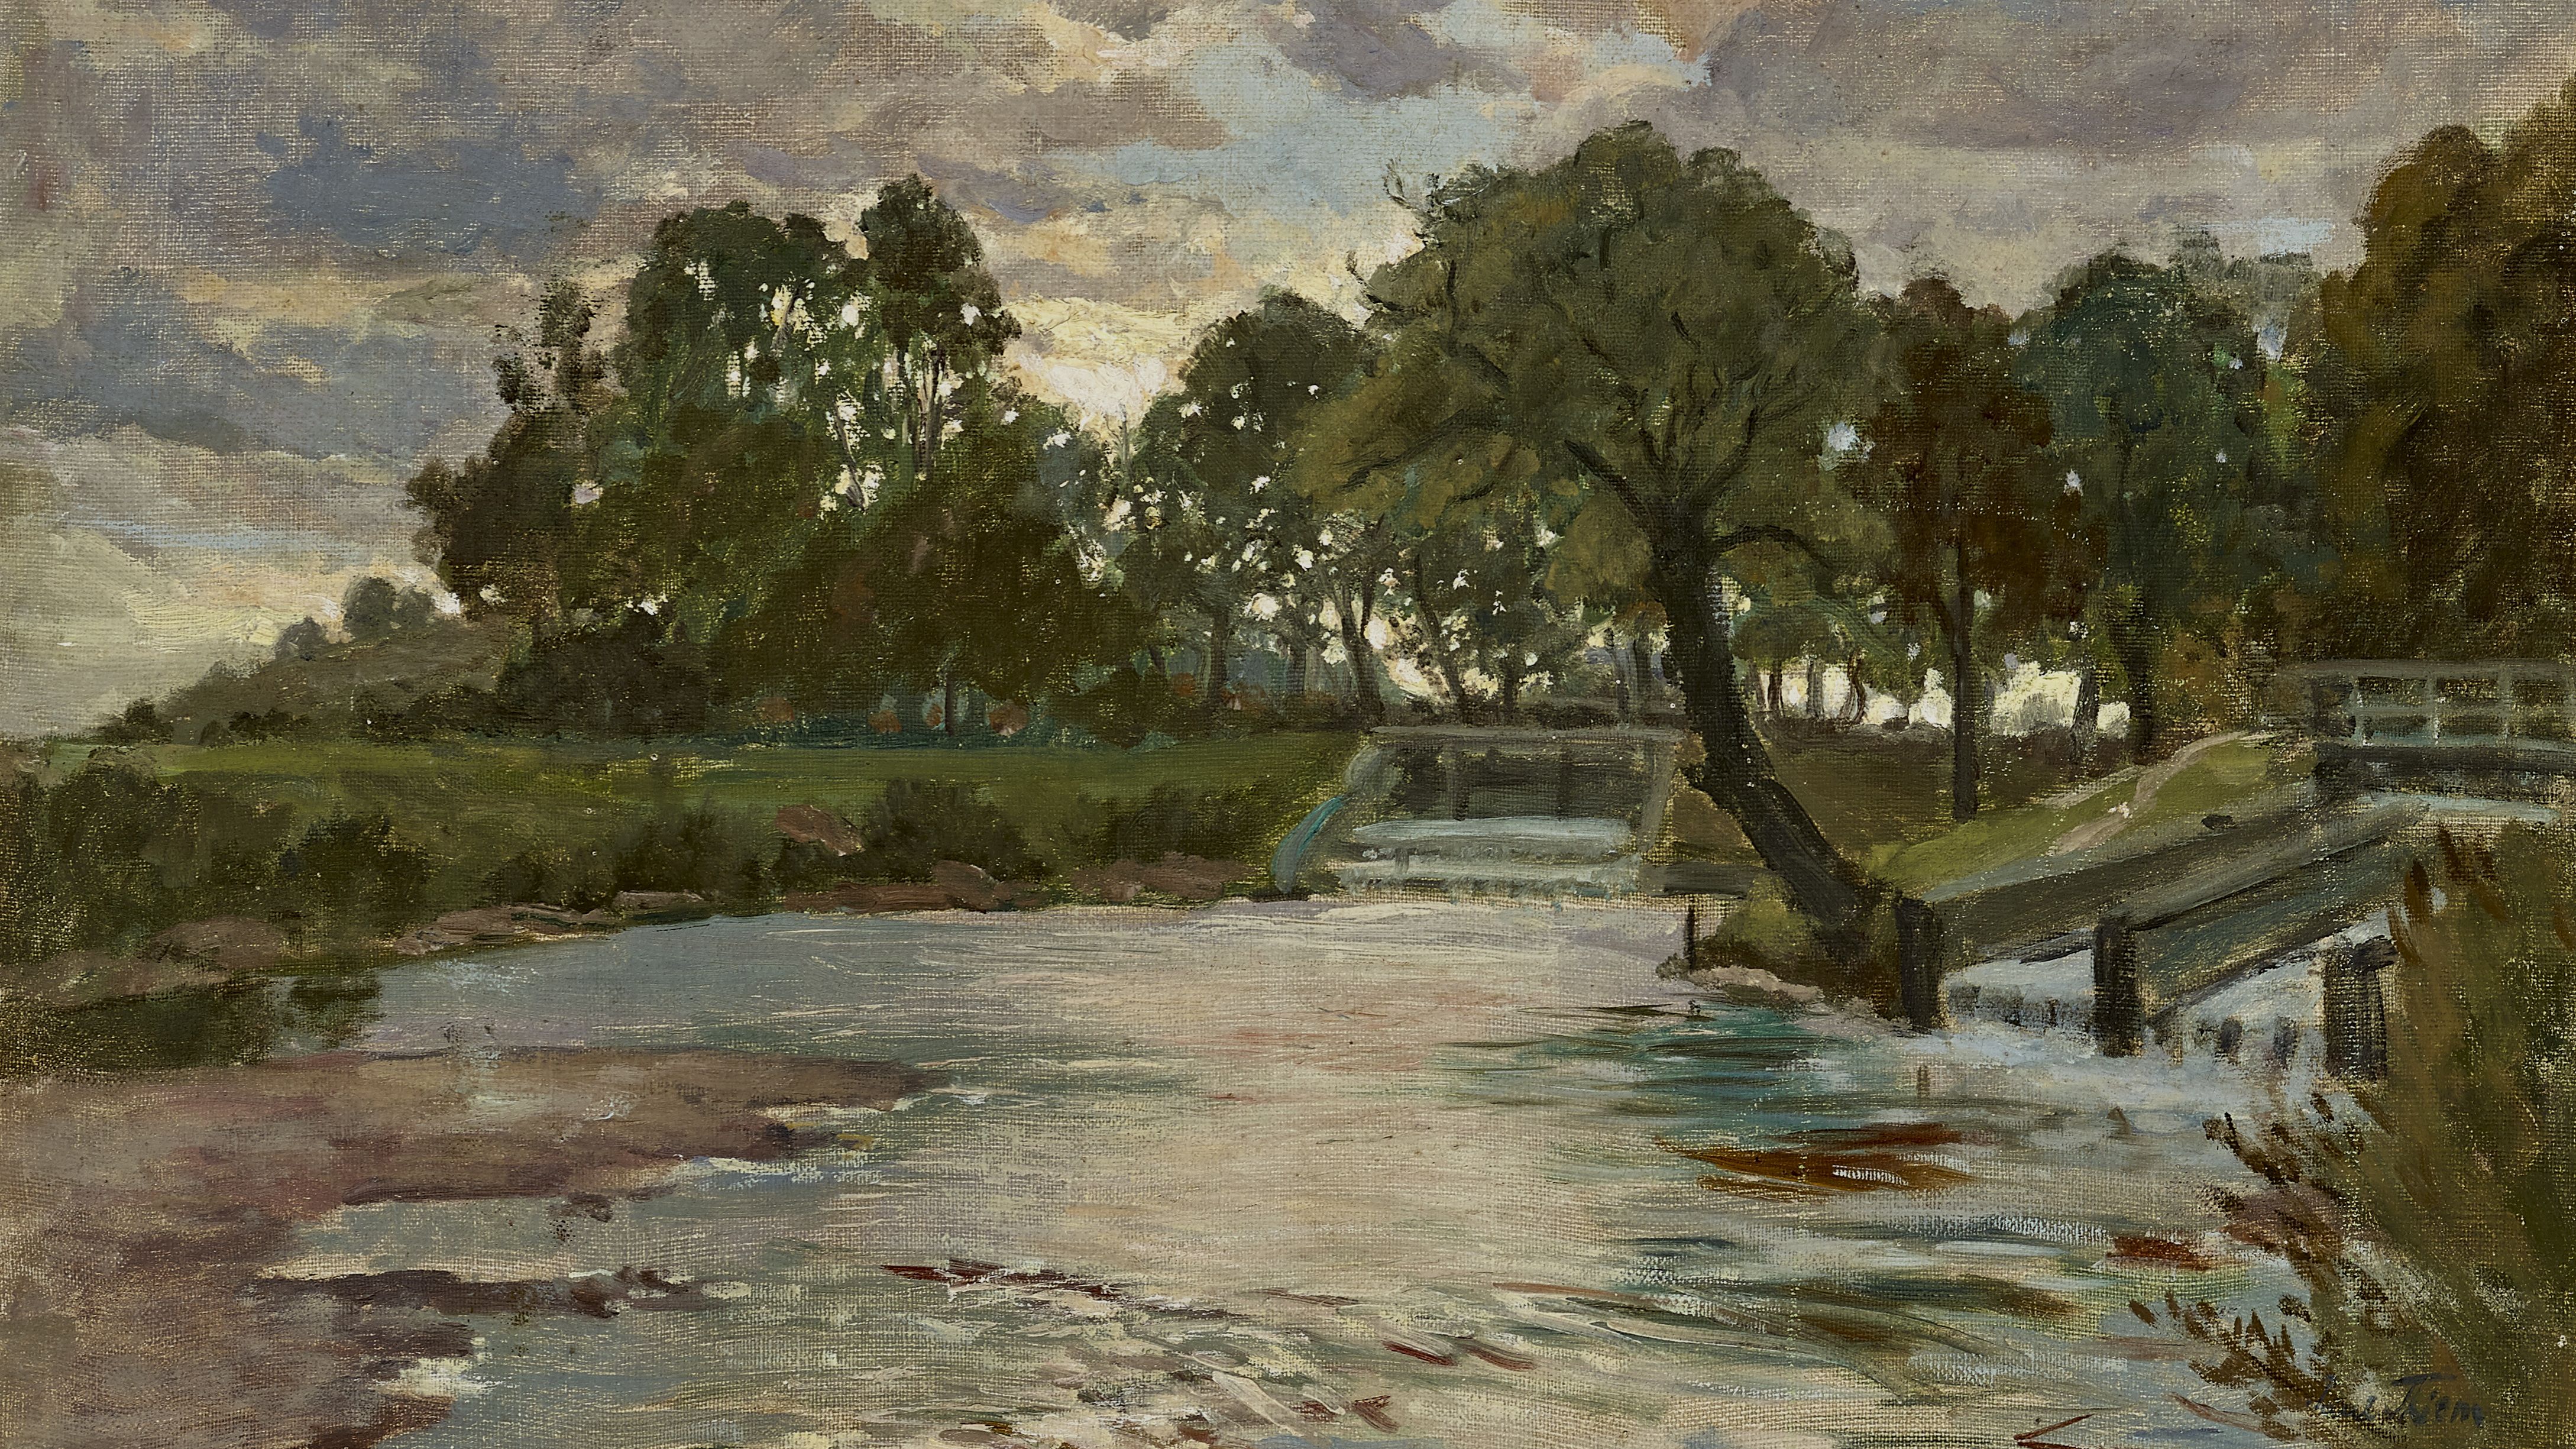 Painting by Paul Thiem, "Evening at the sluice on the River Amper weir"